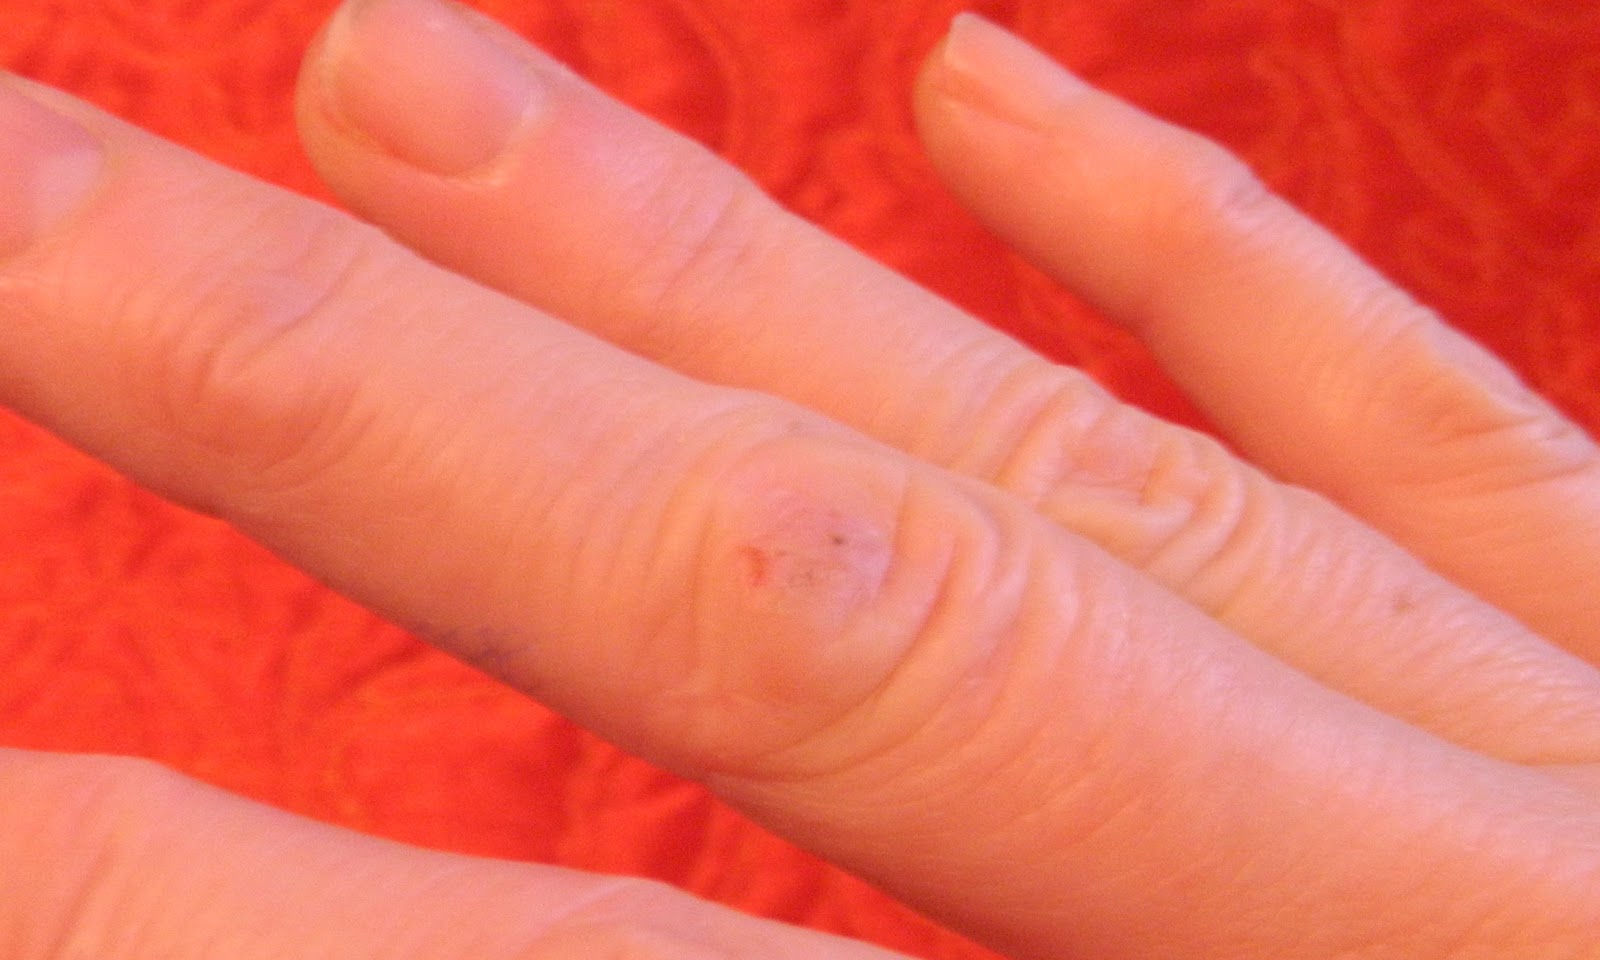 Causes of Tiny, Red Bumps on Fingers | LIVESTRONG.COM